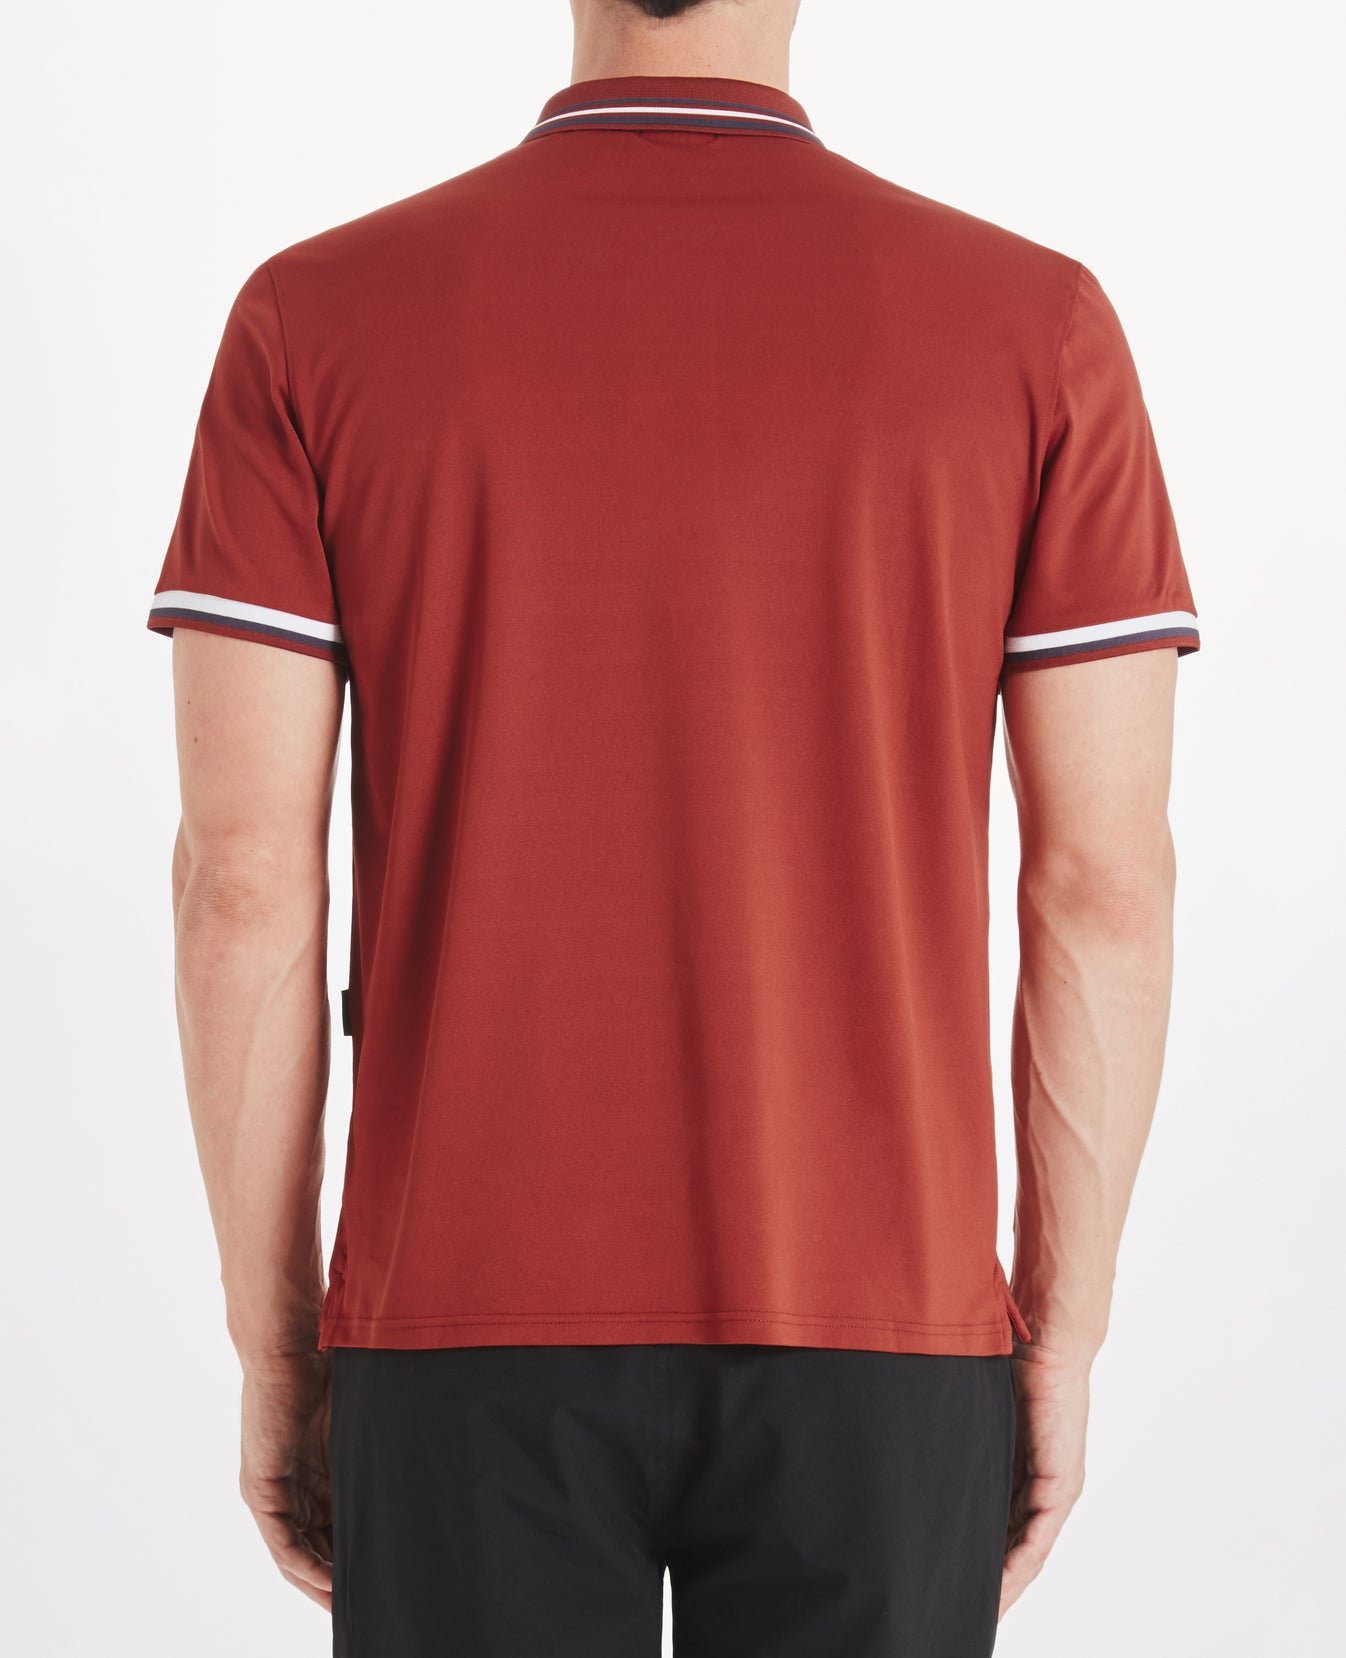 The Overland Polo Barn Red Mens Top Photo 2